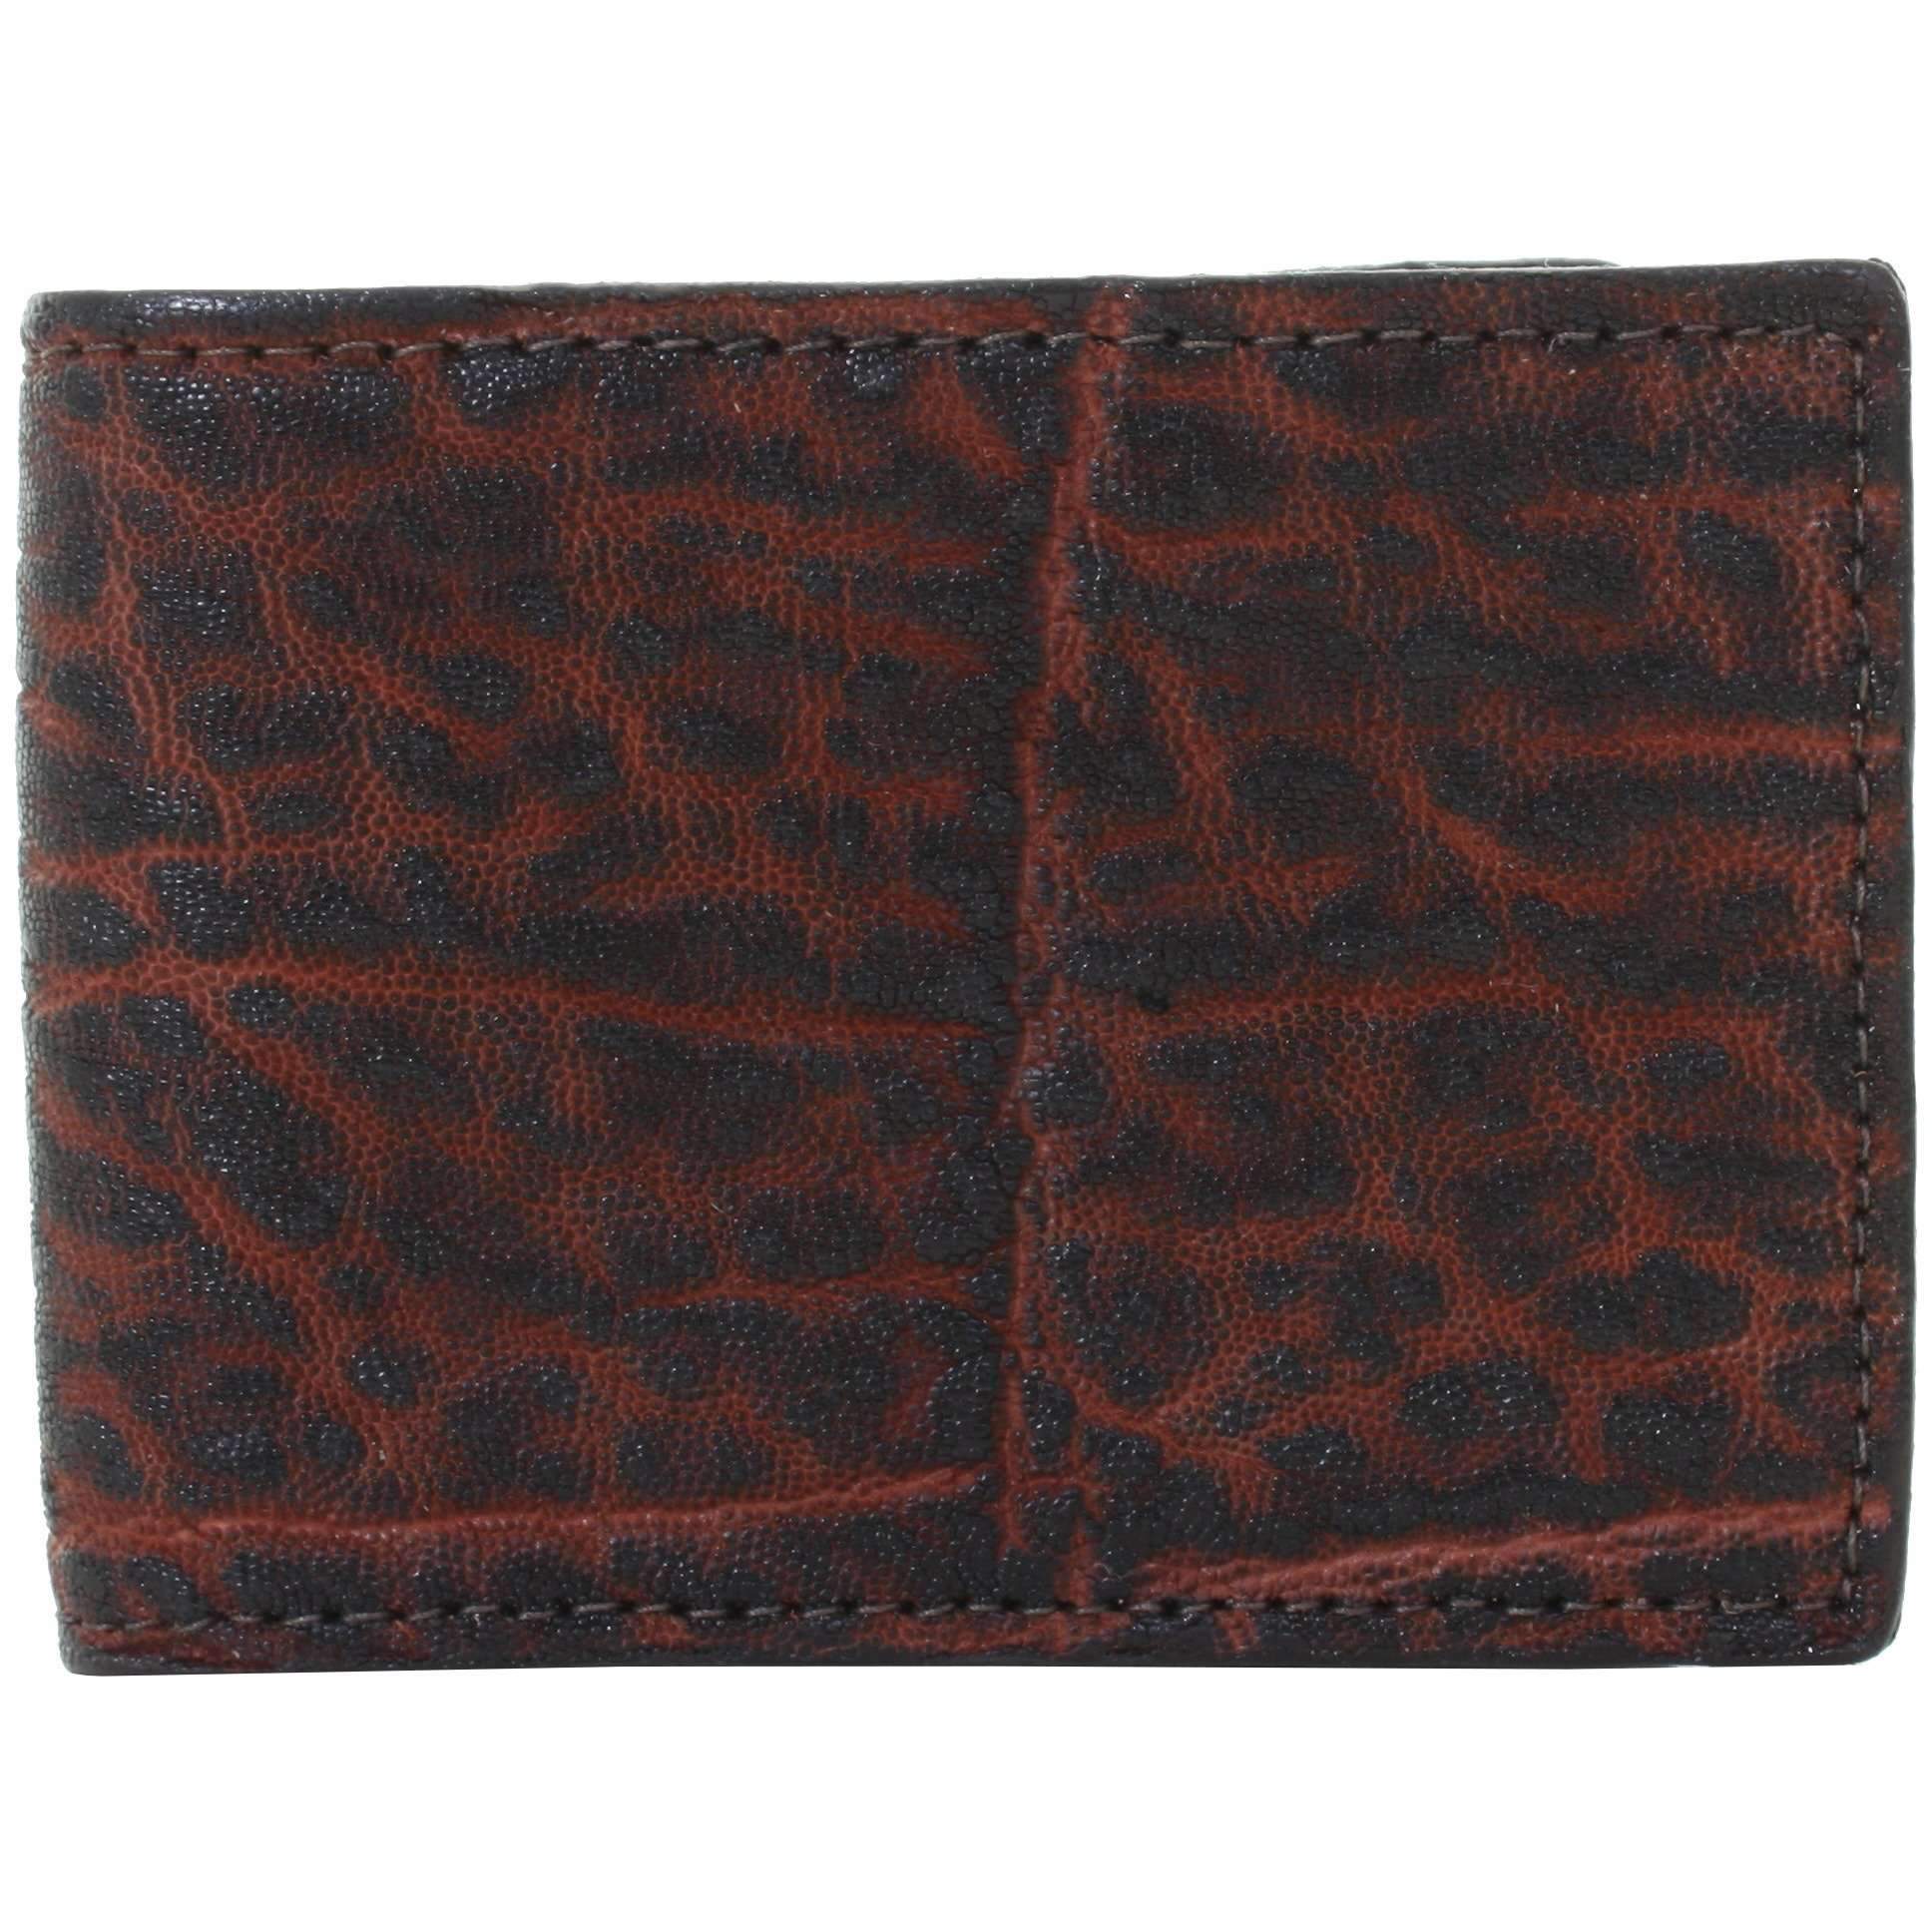 Marshal Men's Special Series Crocodile Pattern Bifold Leather Wallet